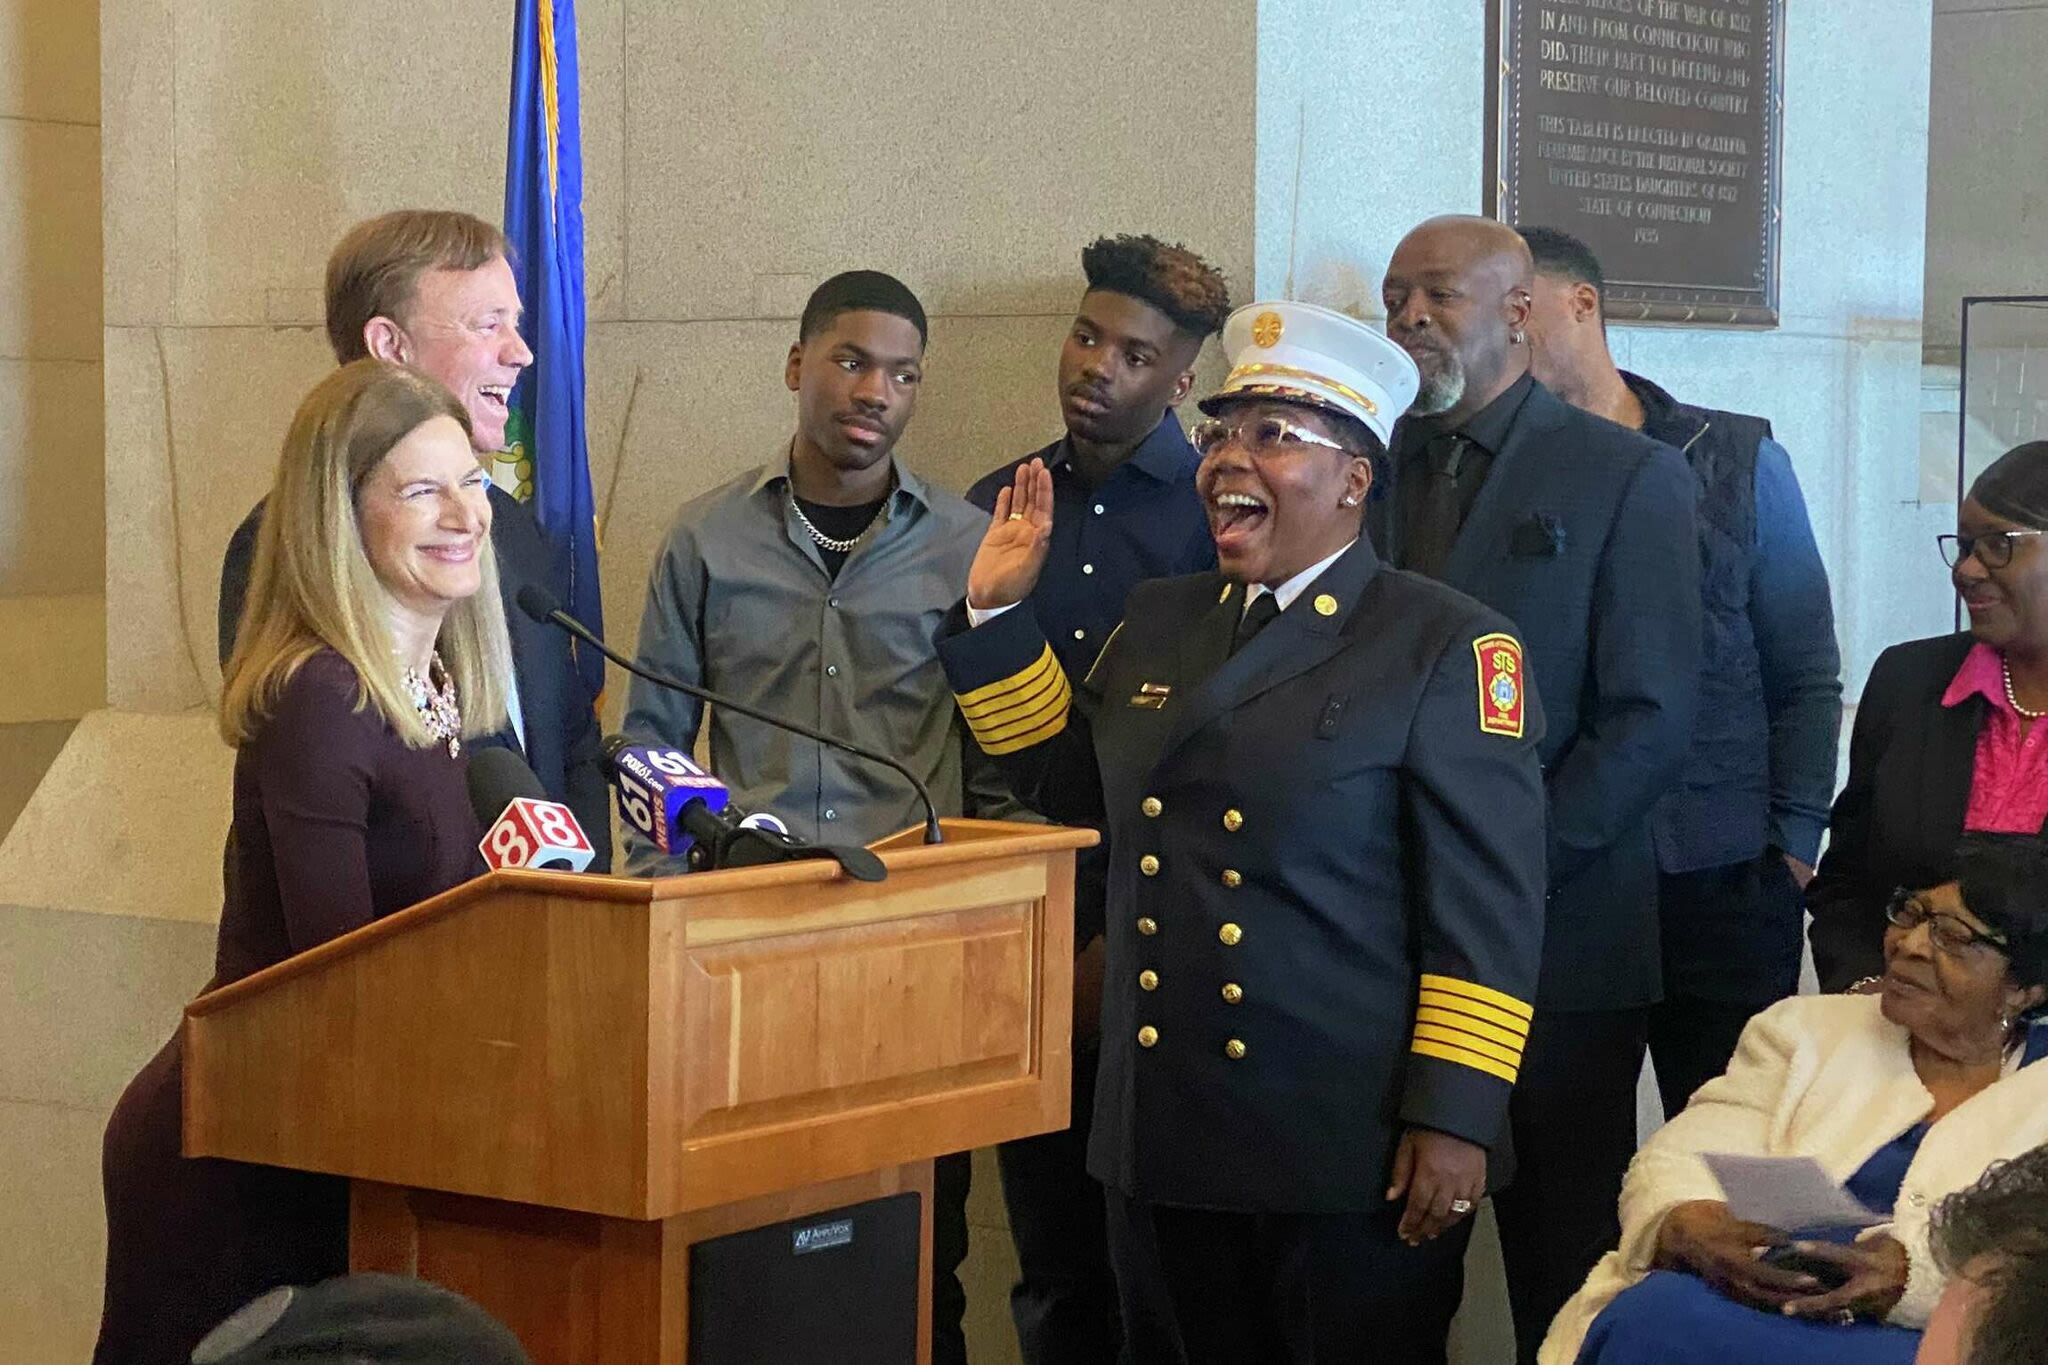 Hamden fire chief Shelly Carter gets Mother's Day surprise from 'Good Morning America'